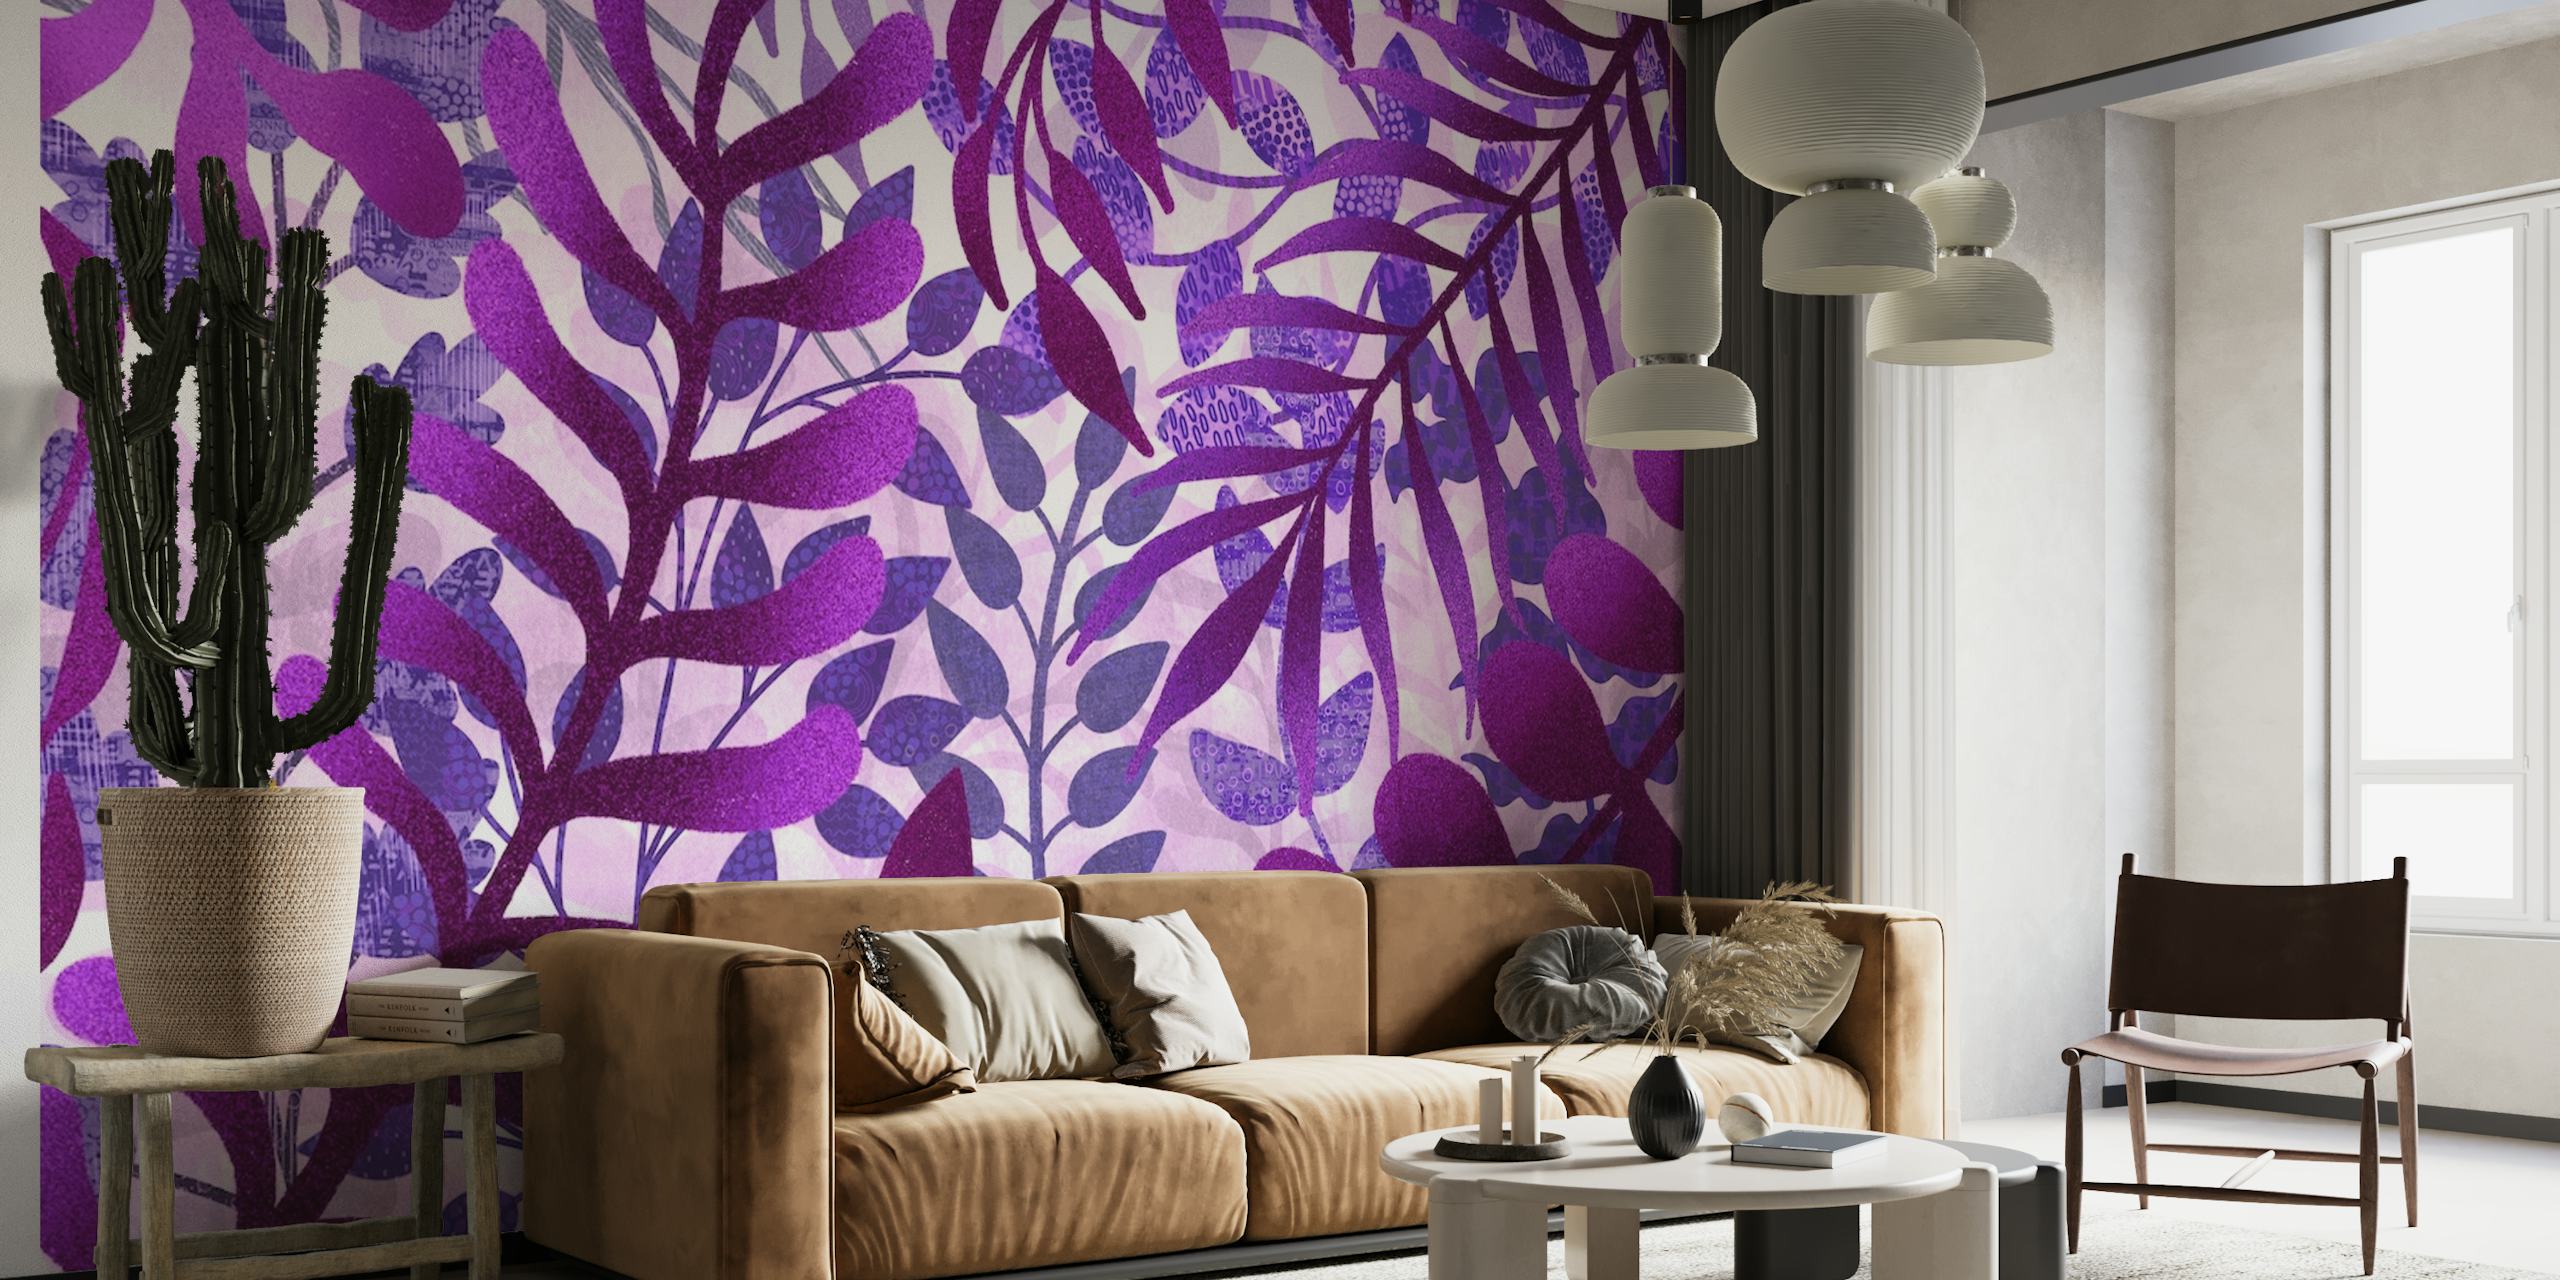 Art with Leaves Design 4 wallpaper